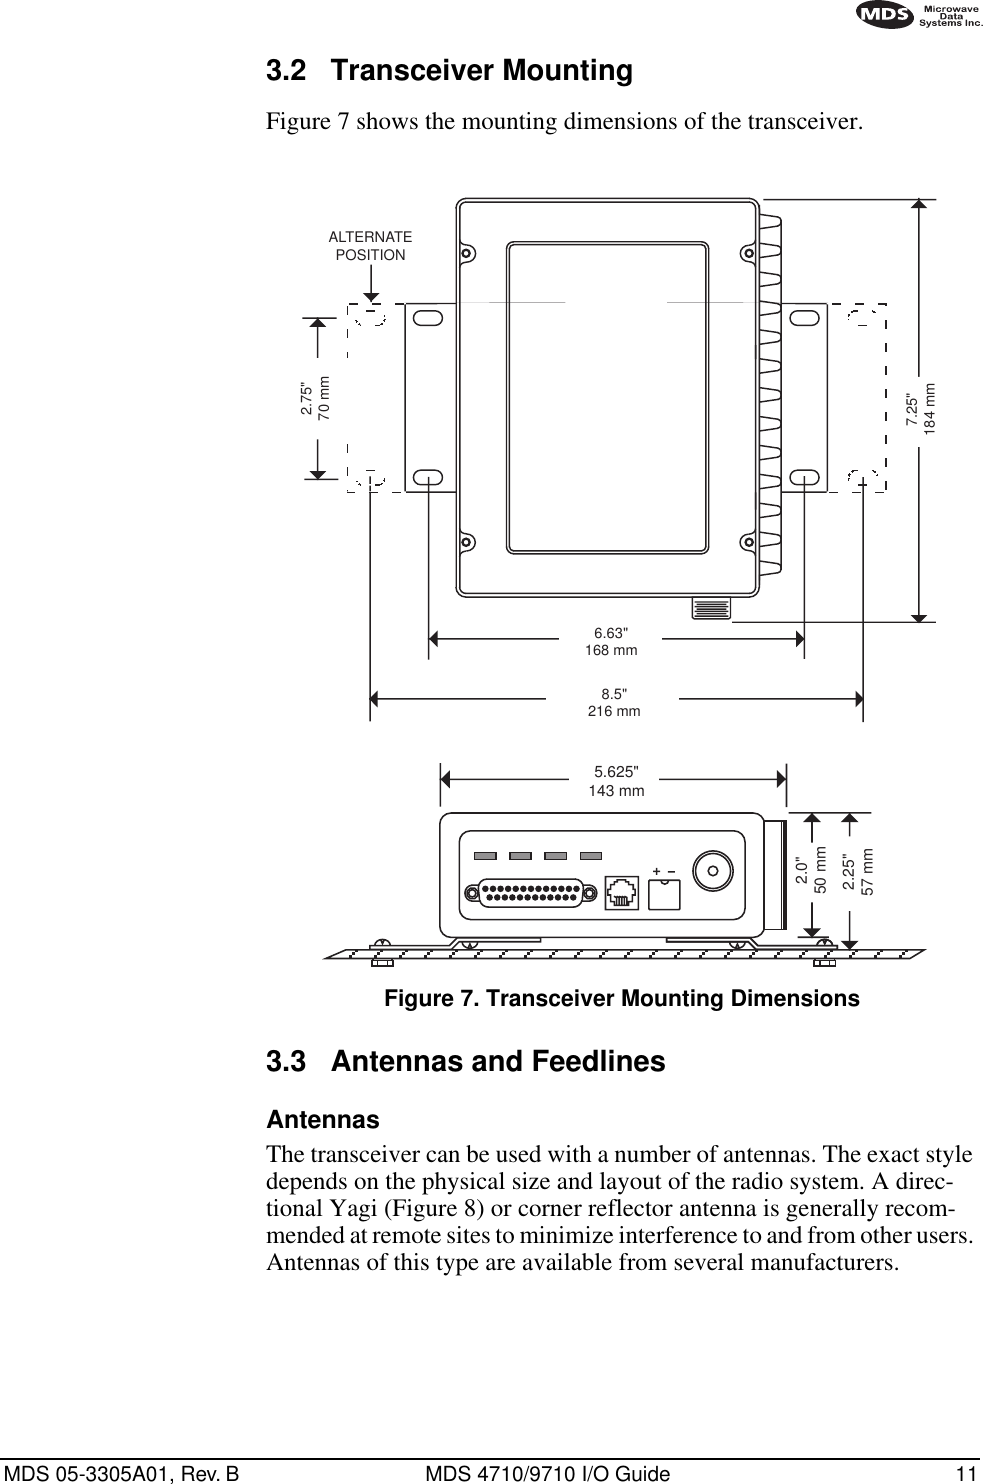 MDS 05-3305A01, Rev. B MDS 4710/9710 I/O Guide 113.2 Transceiver MountingFigure 7 shows the mounting dimensions of the transceiver.Invisible place holderFigure 7. Transceiver Mounting Dimensions3.3 Antennas and FeedlinesAntennasThe transceiver can be used with a number of antennas. The exact style depends on the physical size and layout of the radio system. A direc-tional Yagi (Figure 8) or corner reflector antenna is generally recom-mended at remote sites to minimize interference to and from other users. Antennas of this type are available from several manufacturers.8.5&quot;216 mm1.75&quot;4.44 CM6.63&quot;168 mm2.75&quot;70 mm7.25&quot;184 mmALTERNATEPOSITION5.625&quot;143 mm2.25&quot;57 mm2.0&quot;50 mm